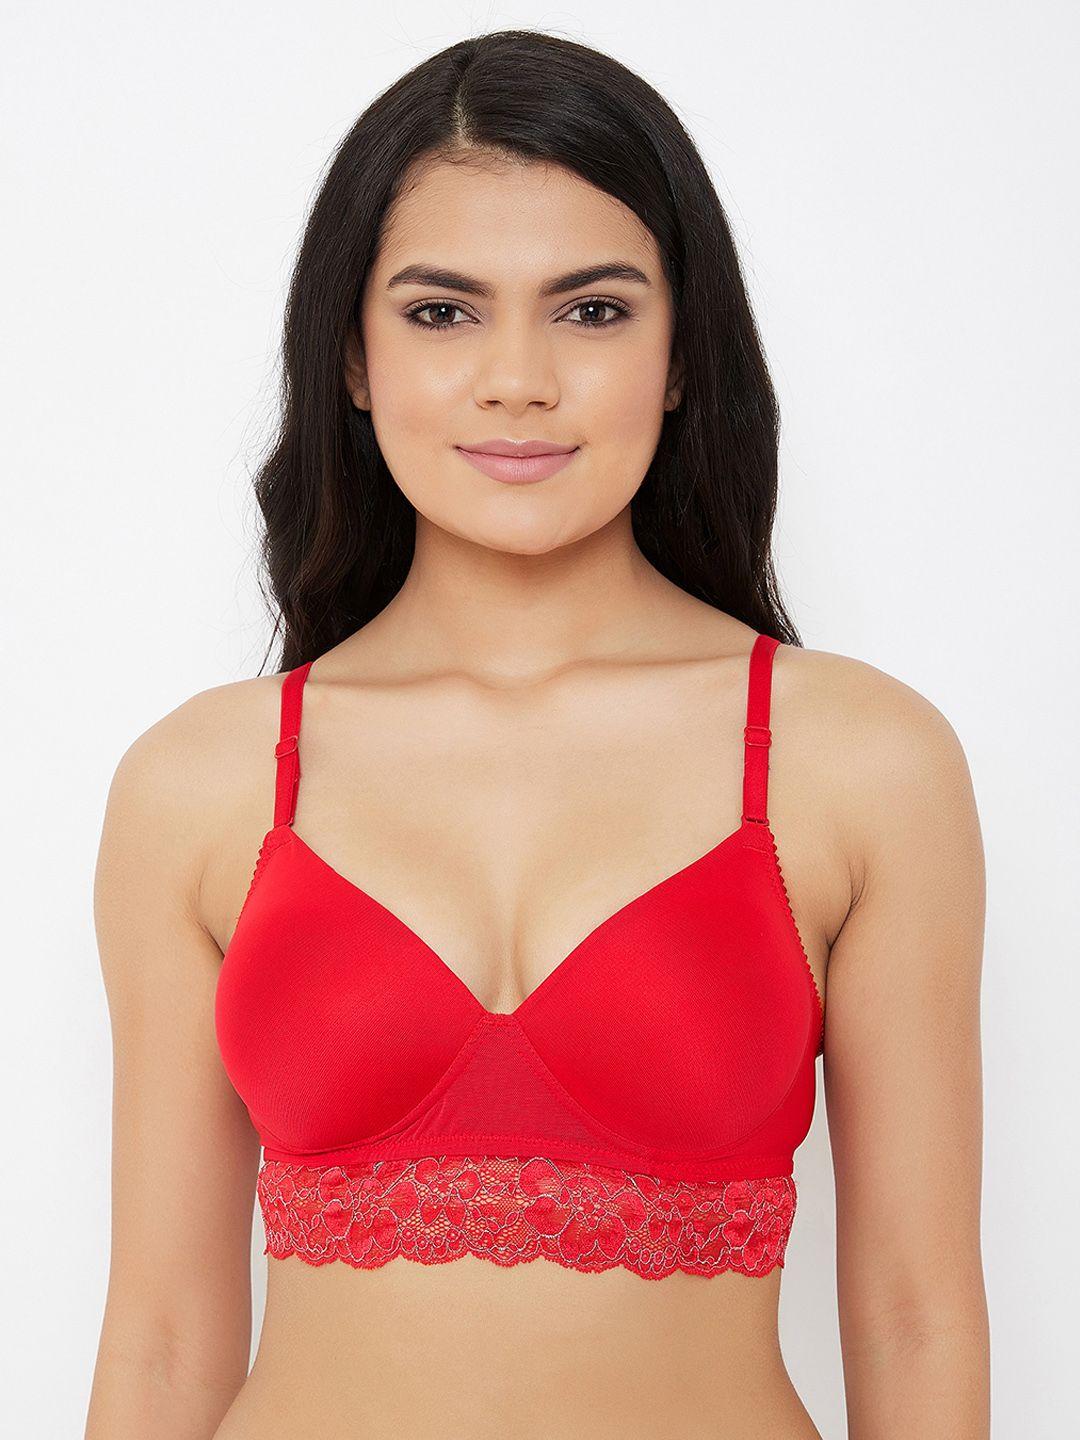 clovia red lace non-wired lightly padded bralette bra br1889p0432b